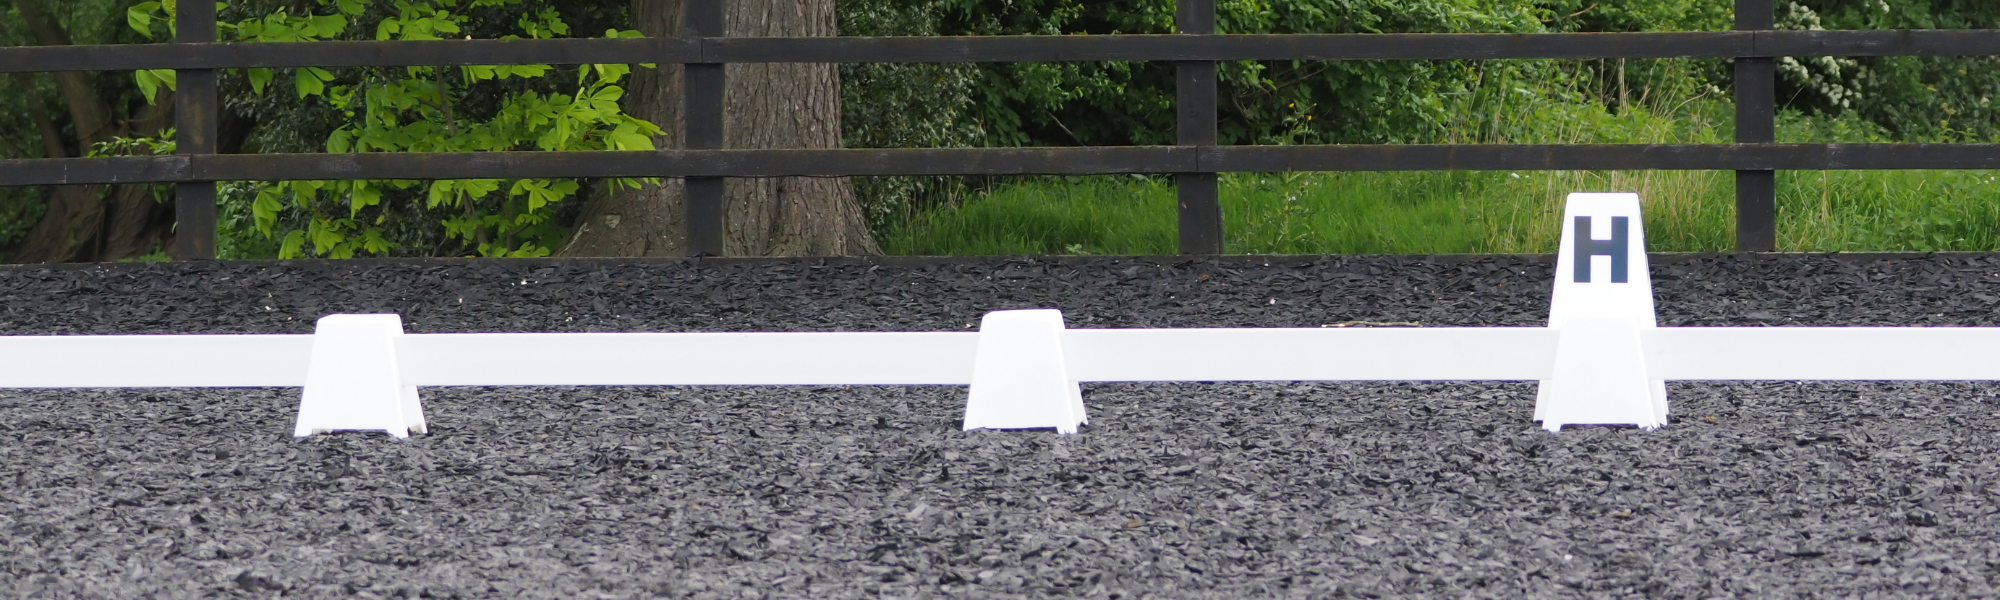 outdoor horse-riding arena with rubber footing mulch 